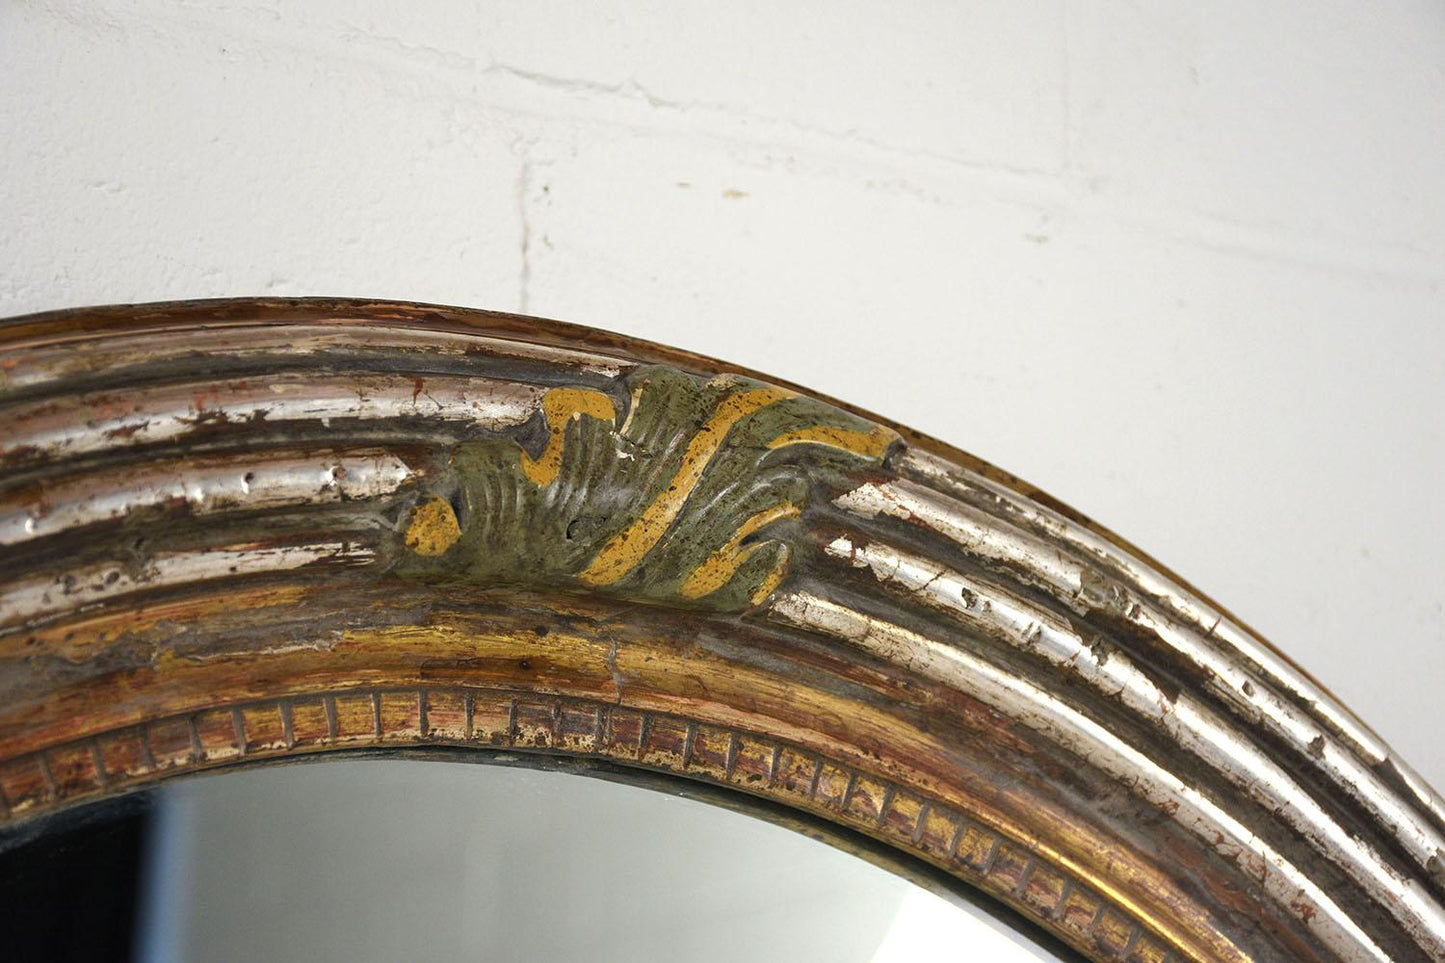 French Louis XVI-Style Carved Giltwood Oval Wall Mirror